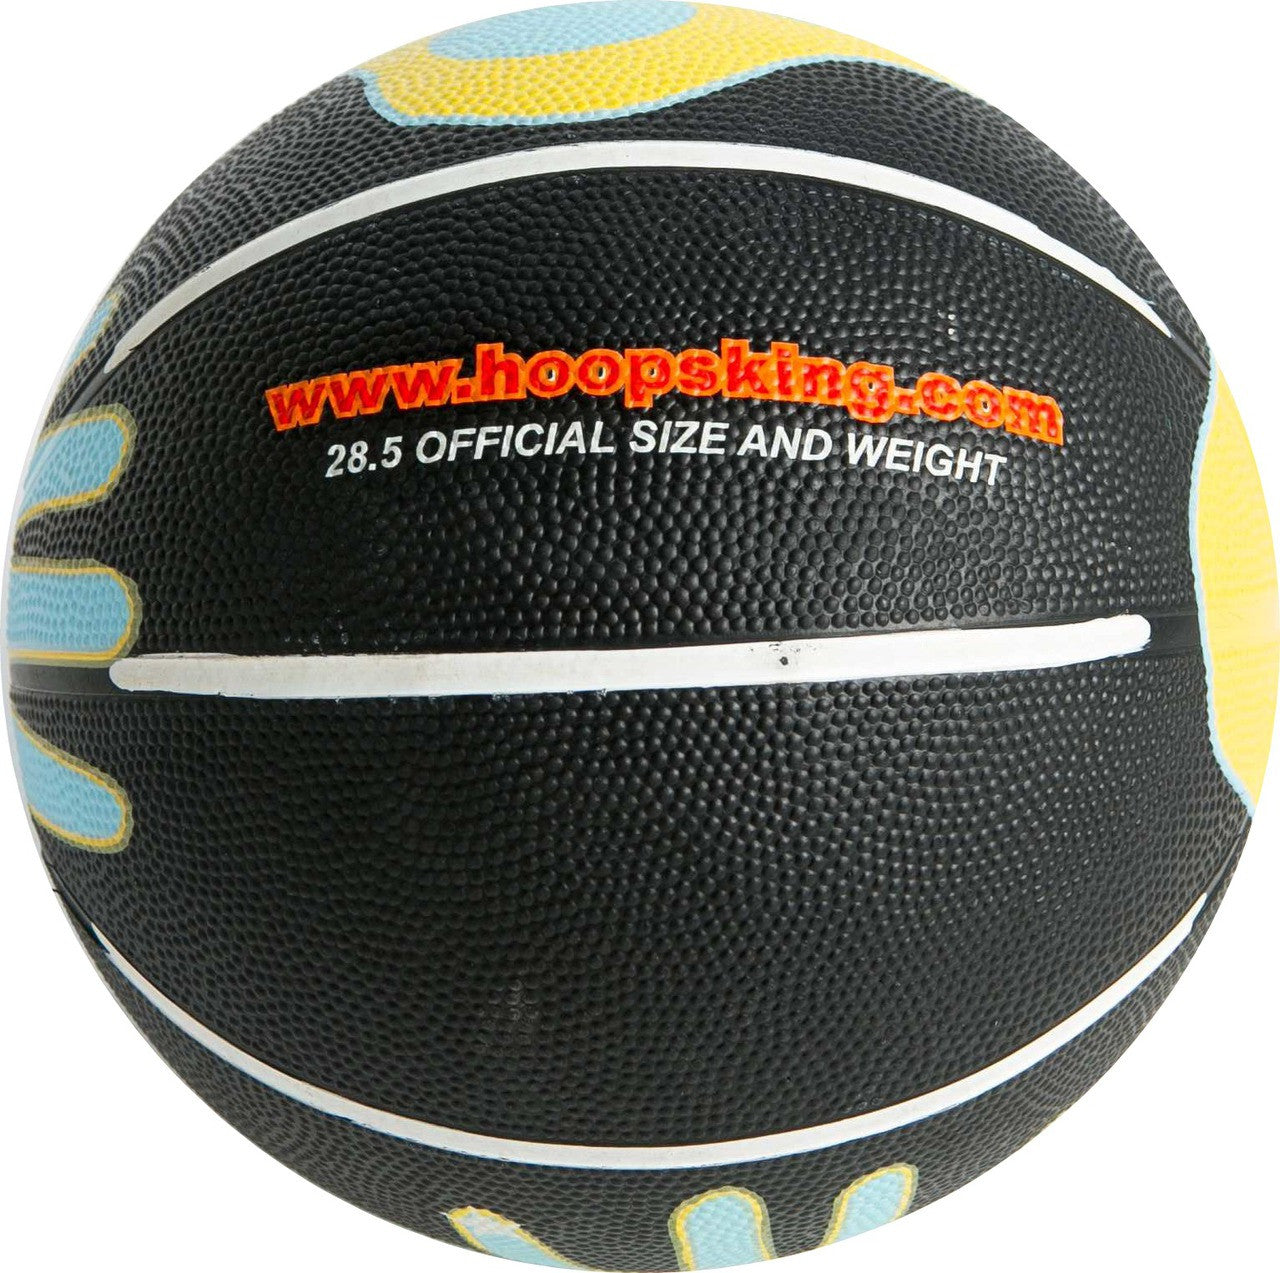 training basketball with hand painted on it